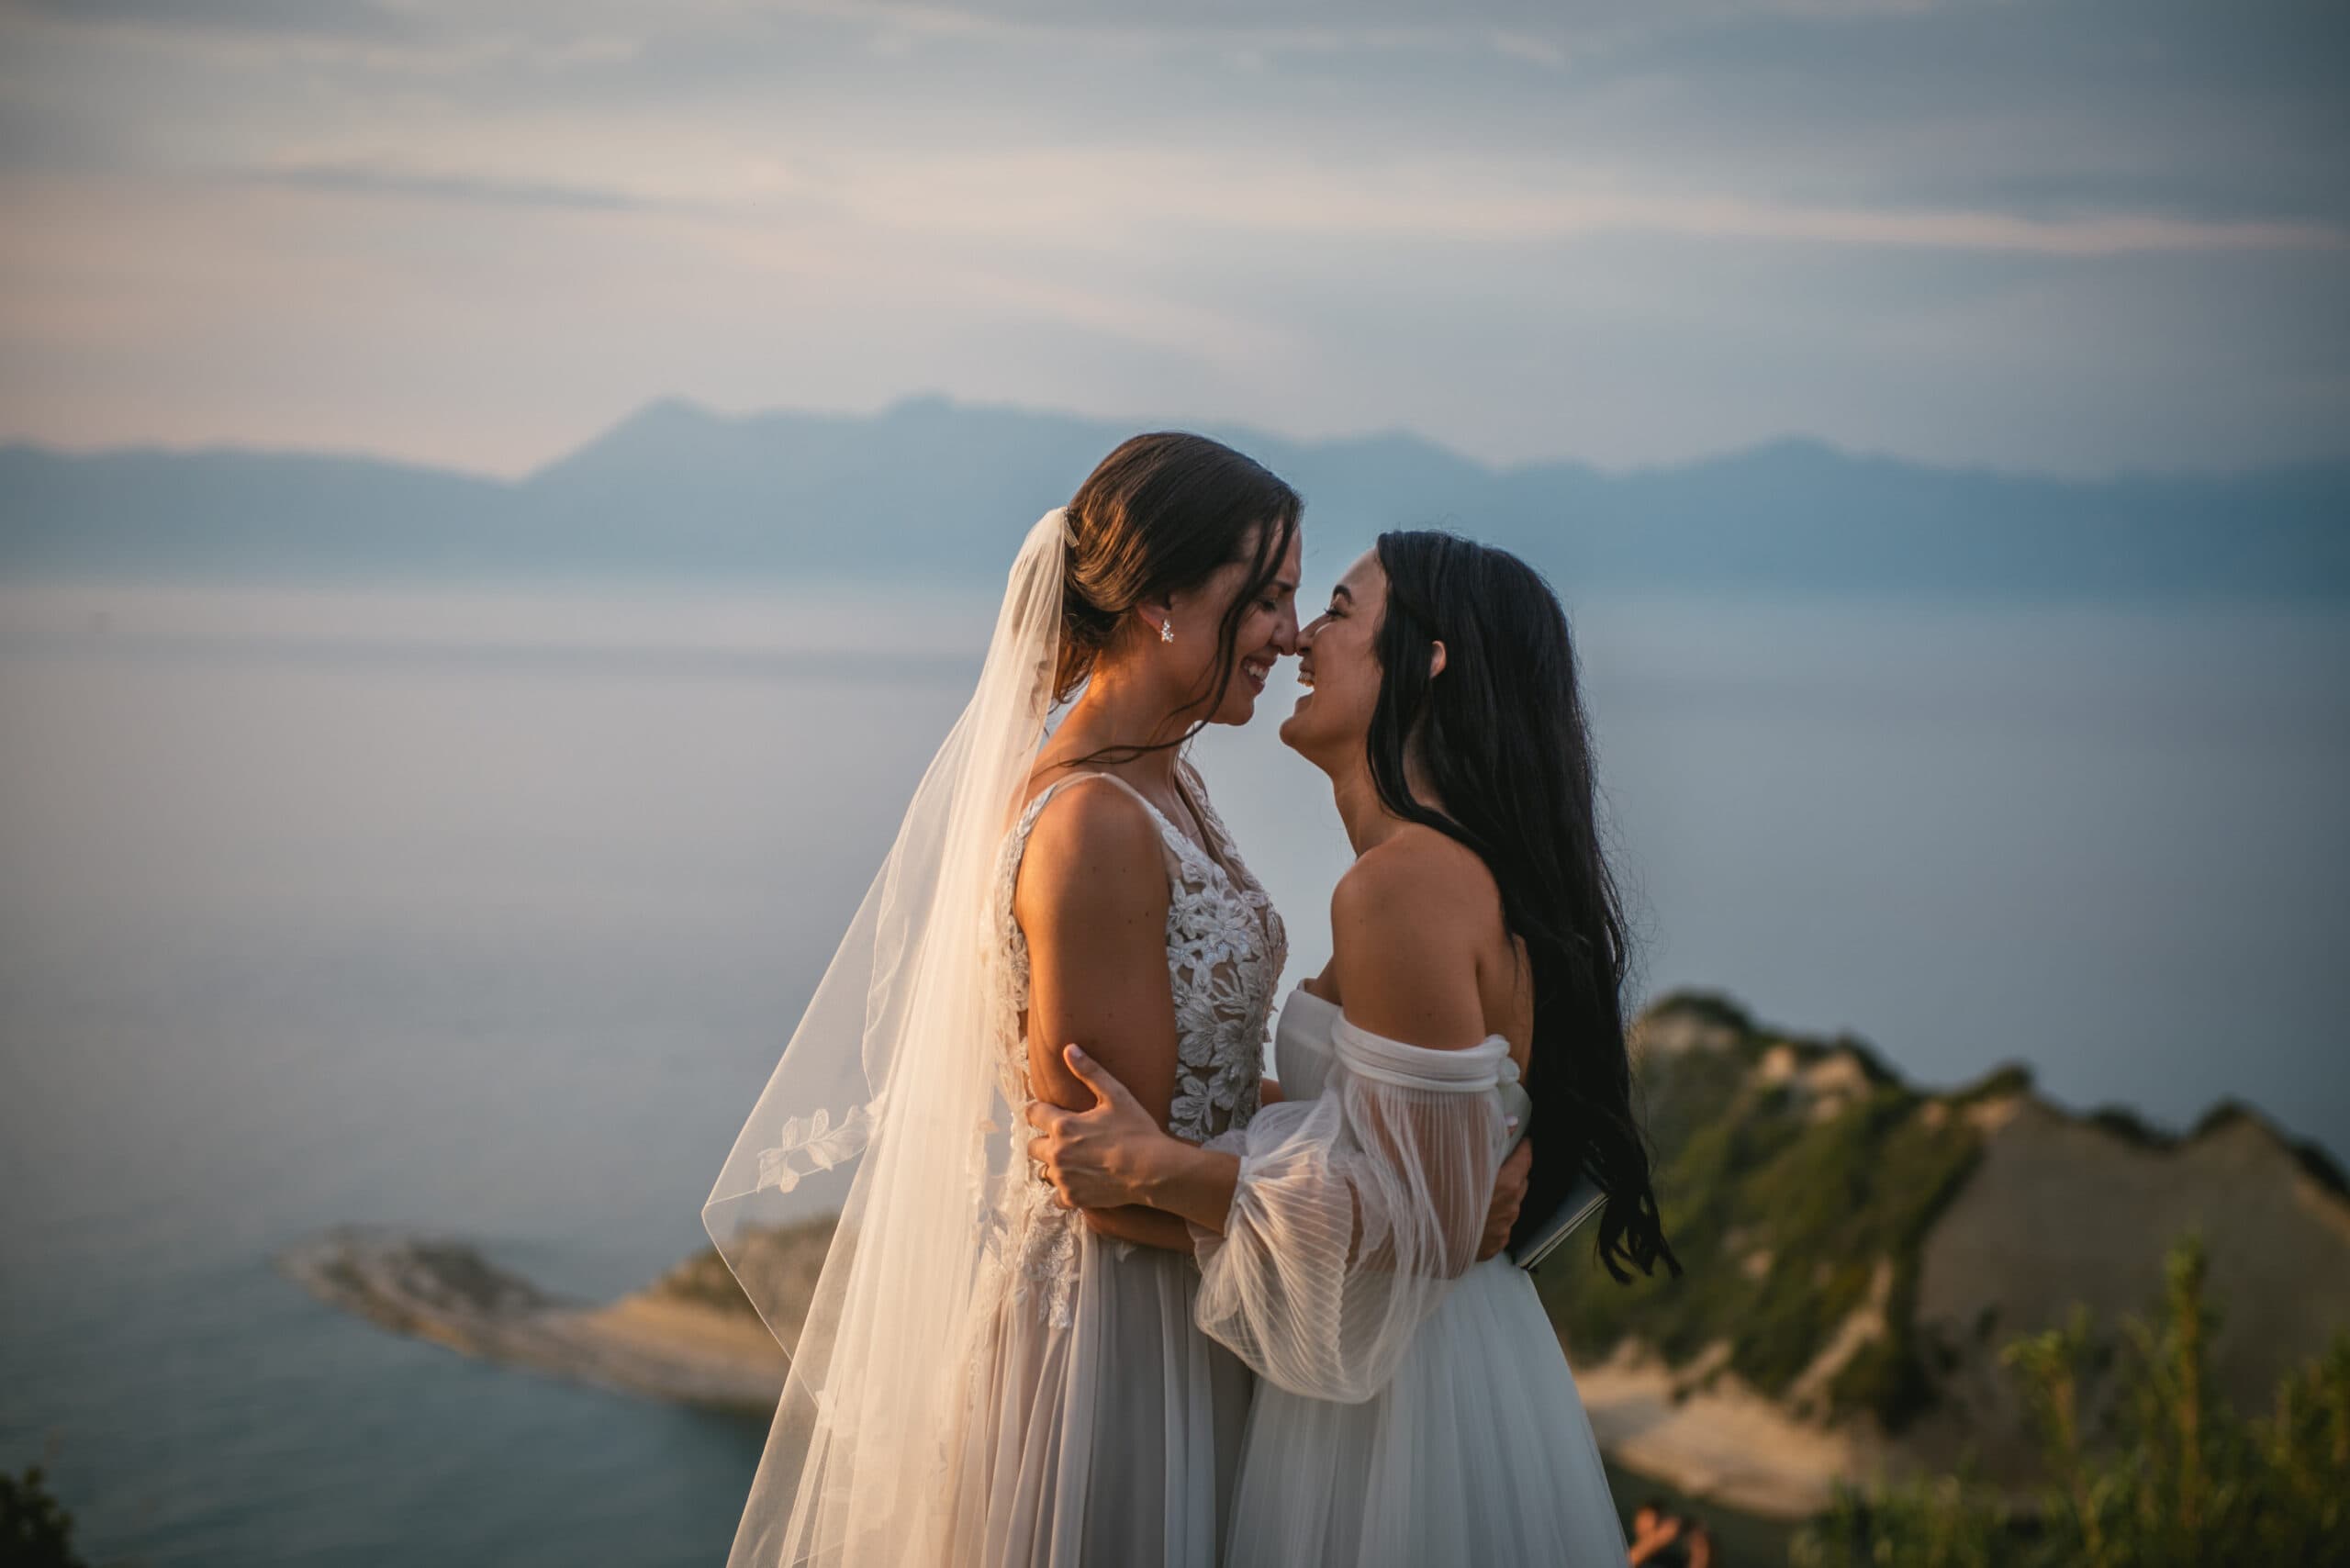 The couple's hands gently touching as they seal their love in Corfu elopement.